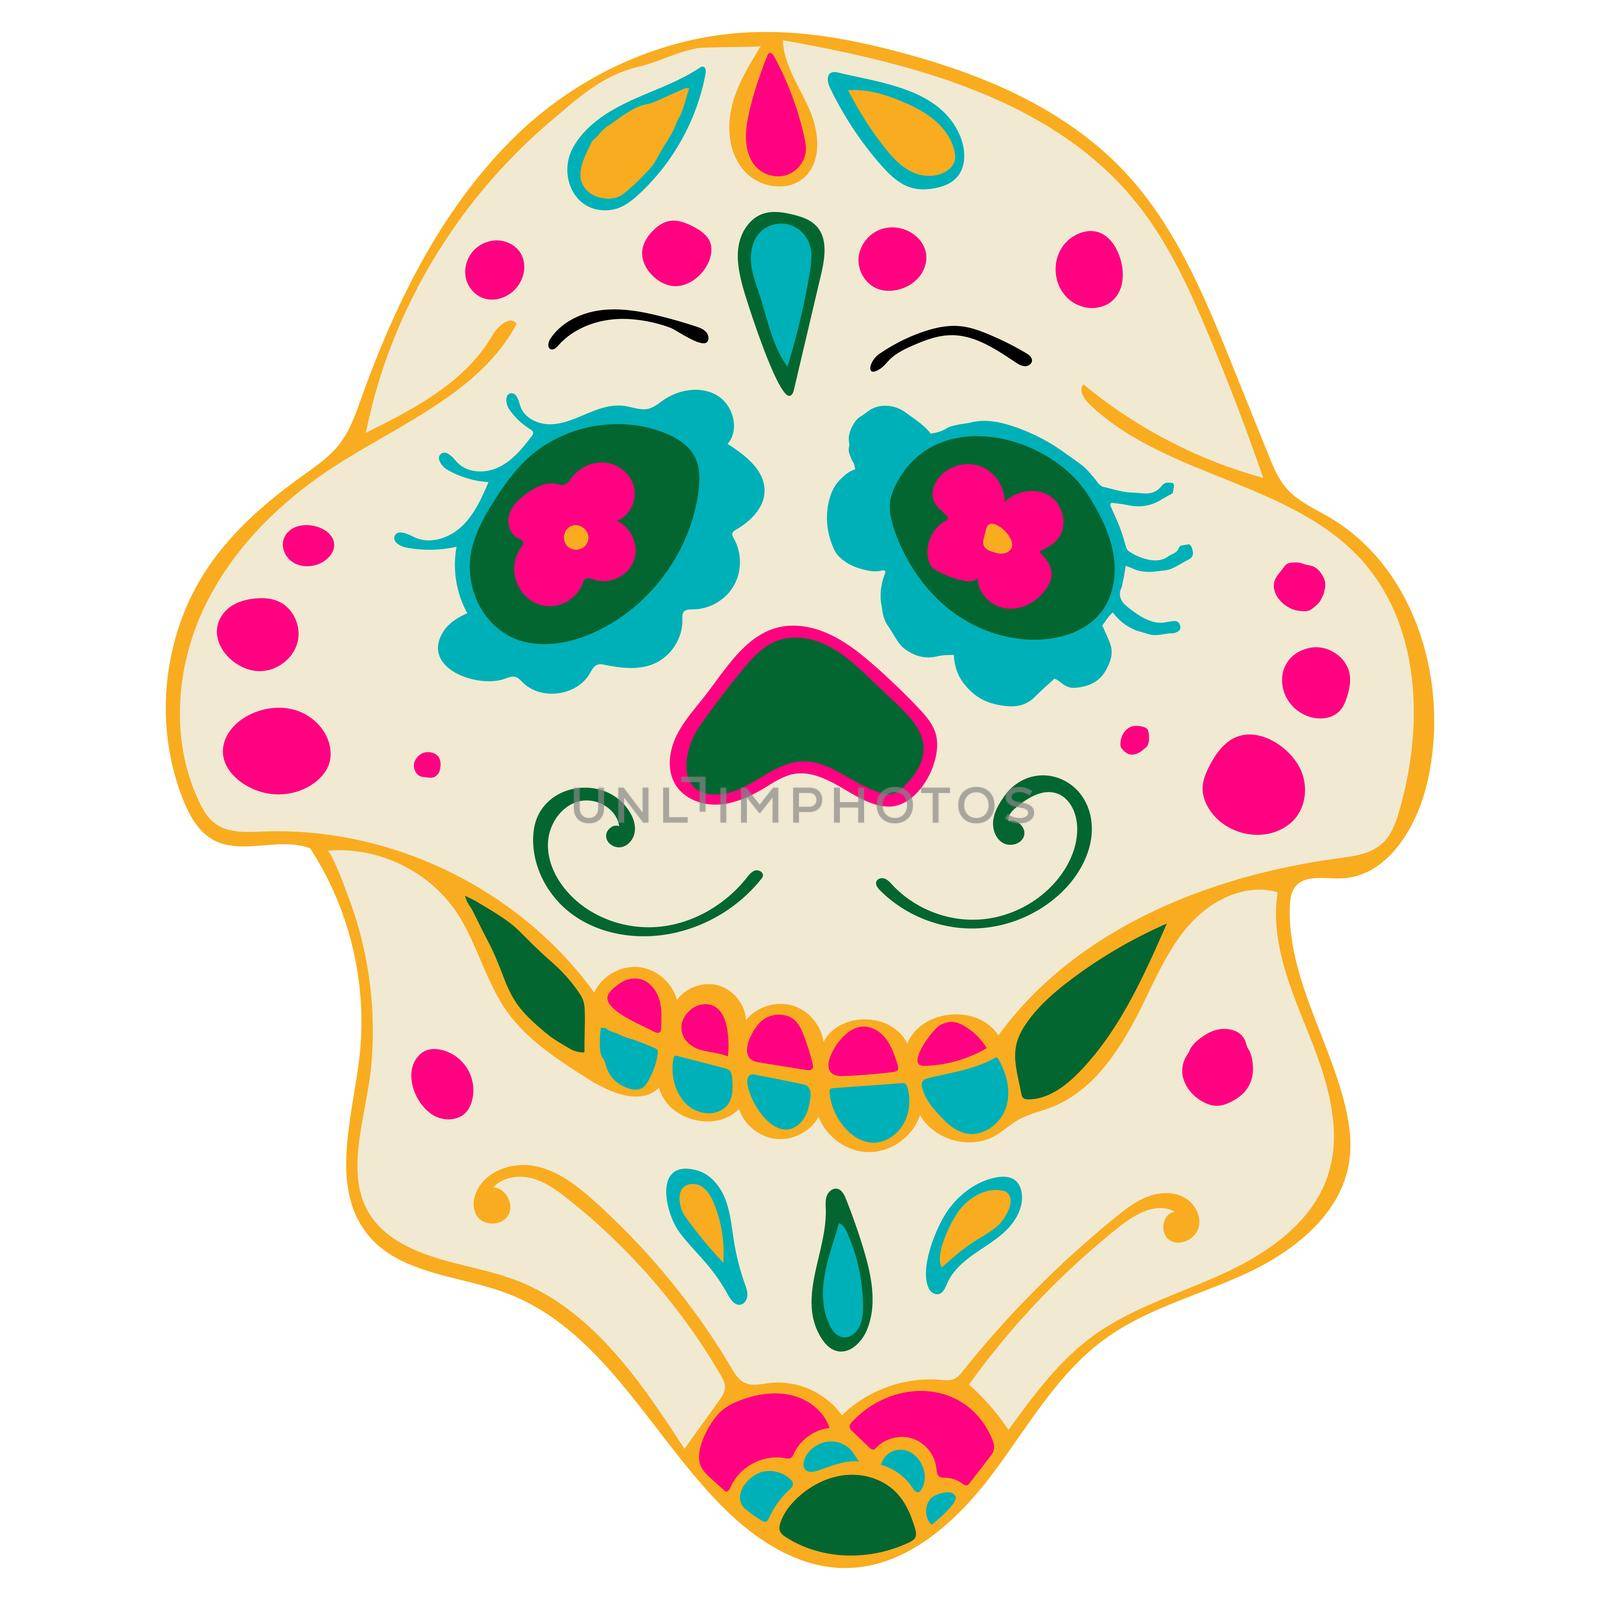 Day of the Dead. Dia de los Muertos. Sugar Skull with Colorful Mexican Elements and Flowers. by Rina_Dozornaya